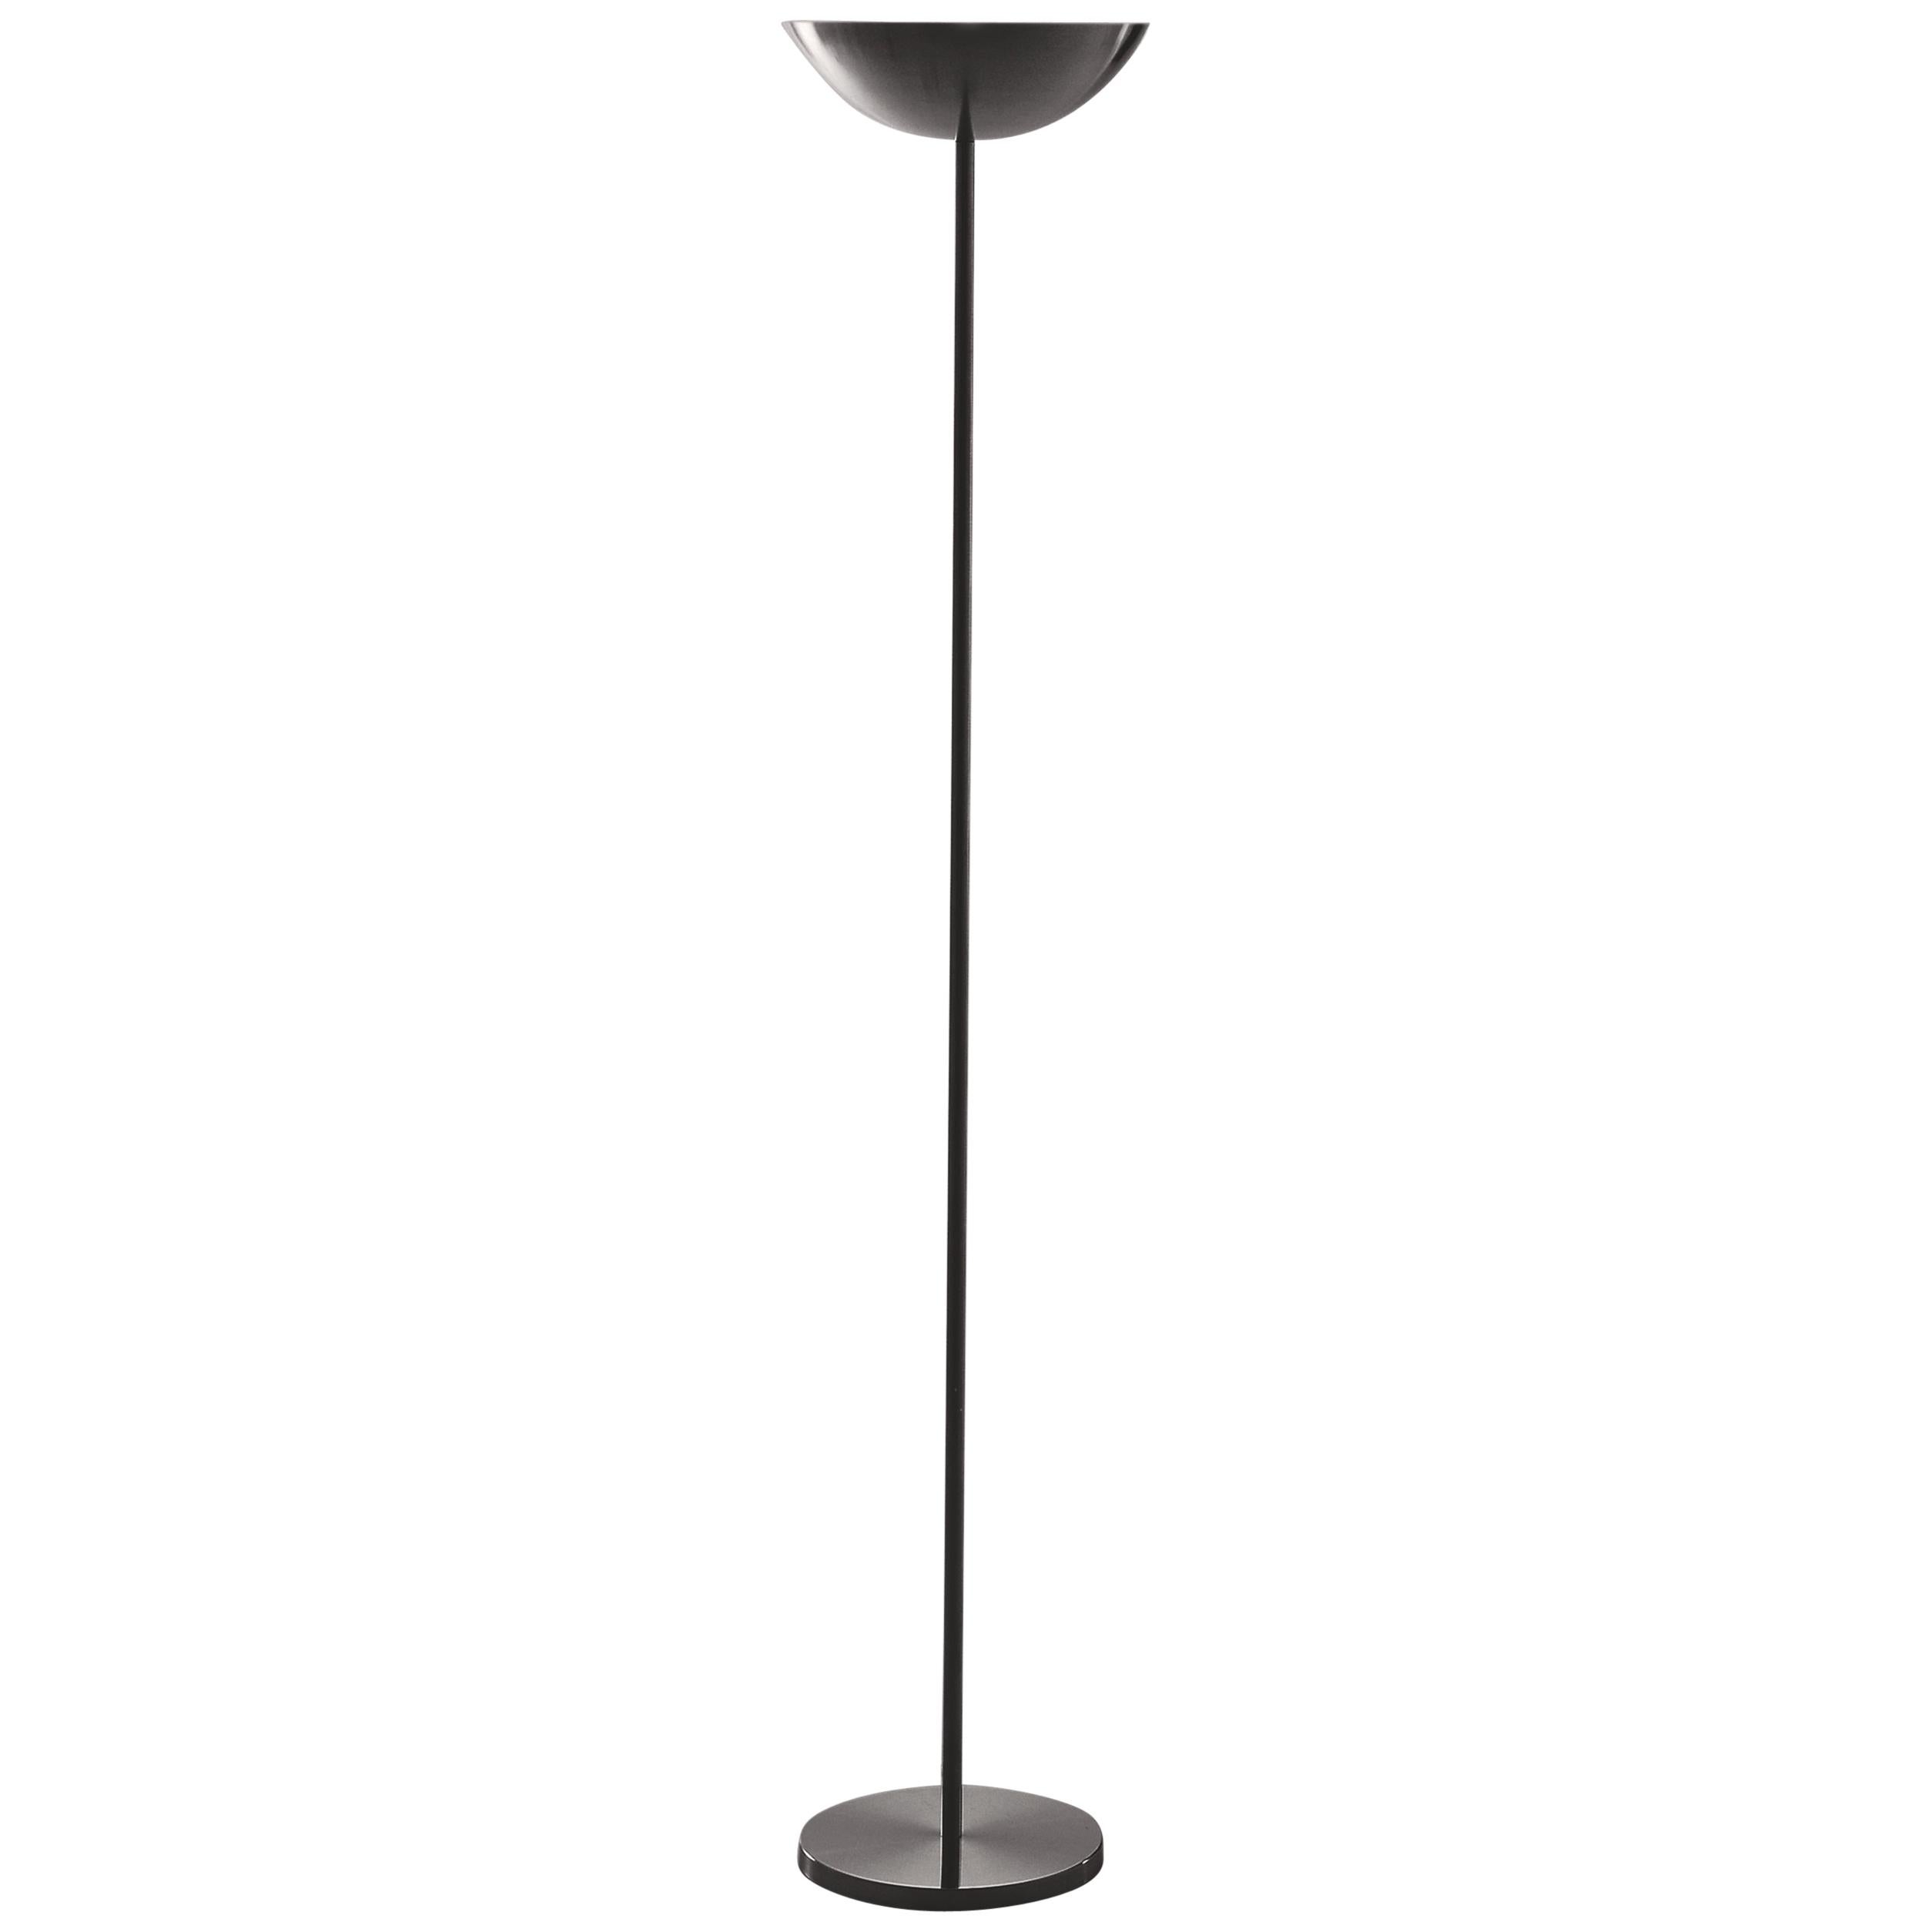 Martinelli Luce V.D.L 2234 Floor Lamp by Richard Neutra For Sale